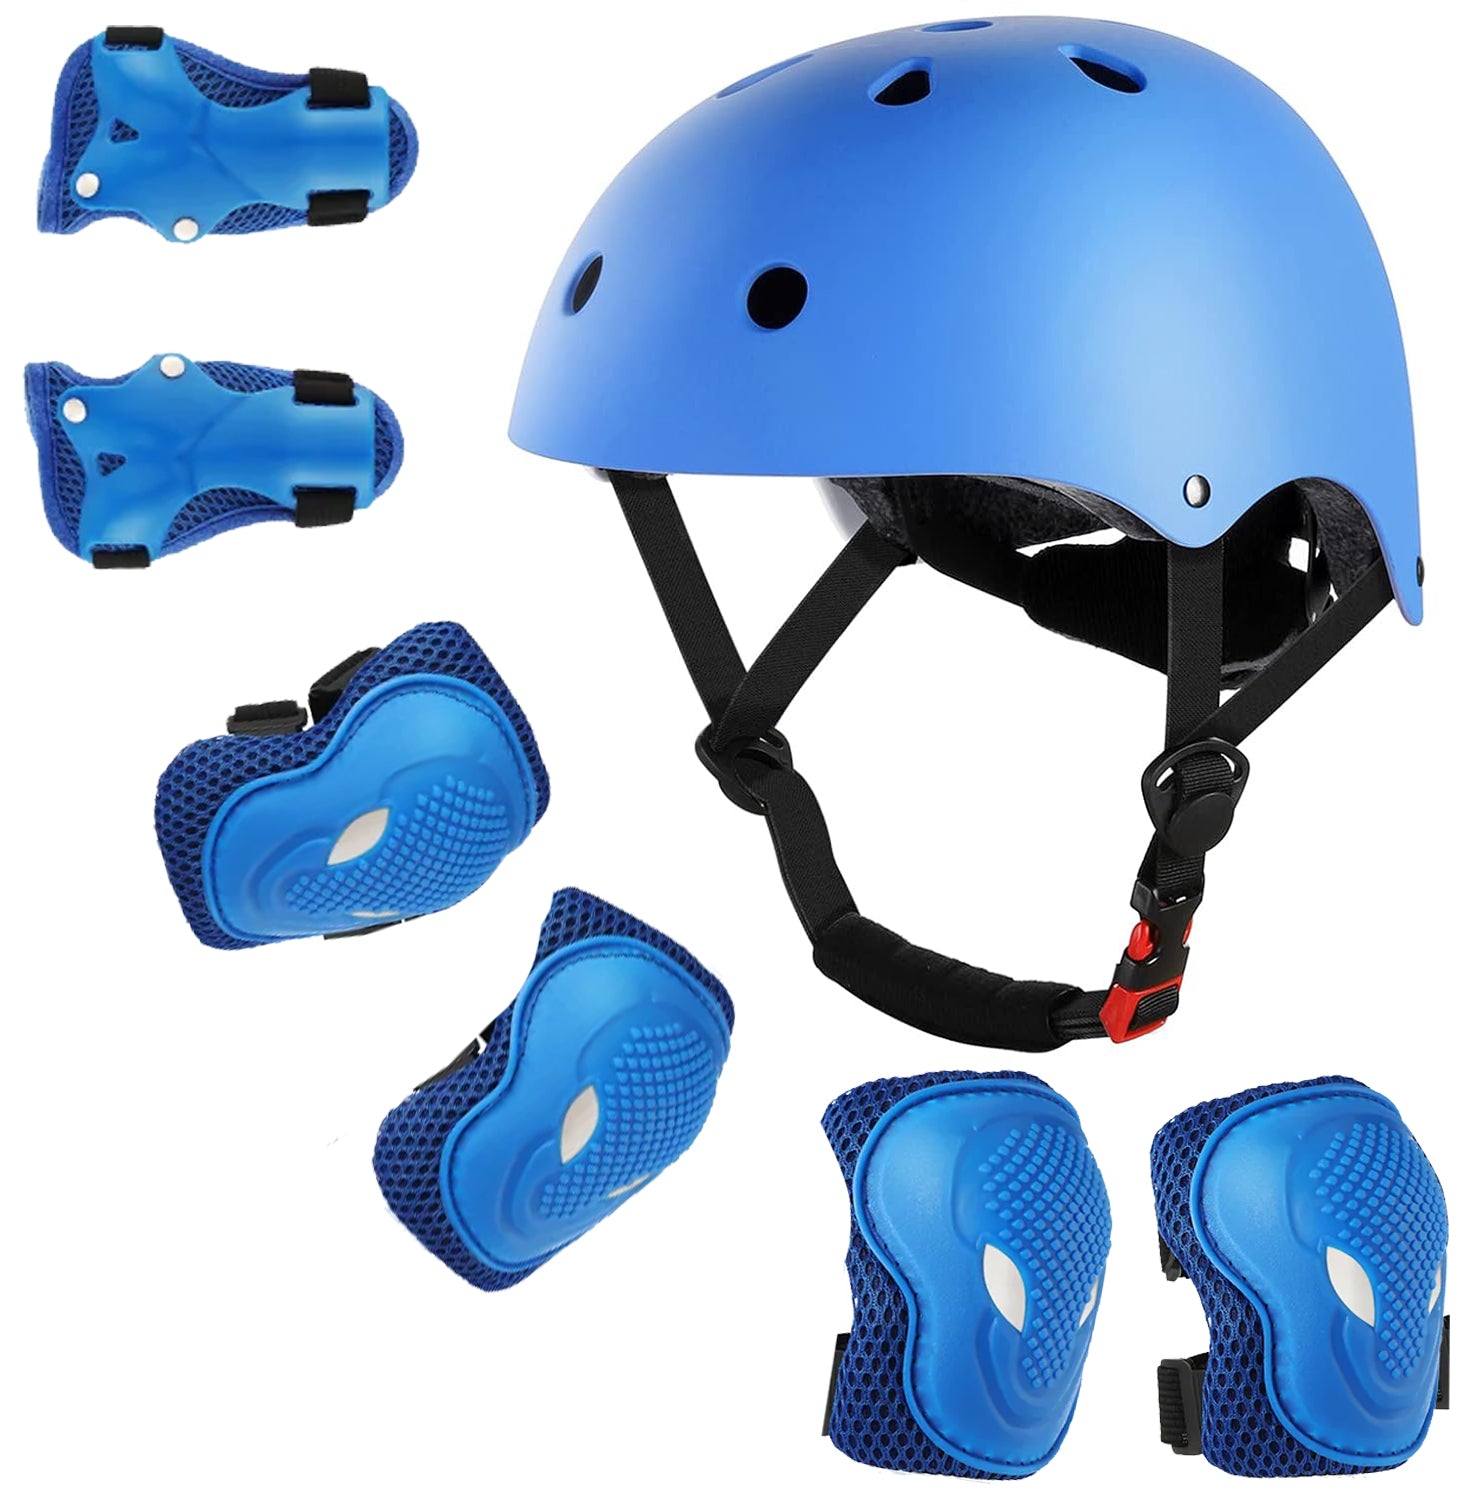 LANOVAGEAR Kids Bicycle Helmet Protective Gear Set Age 2-8, 60% OFF